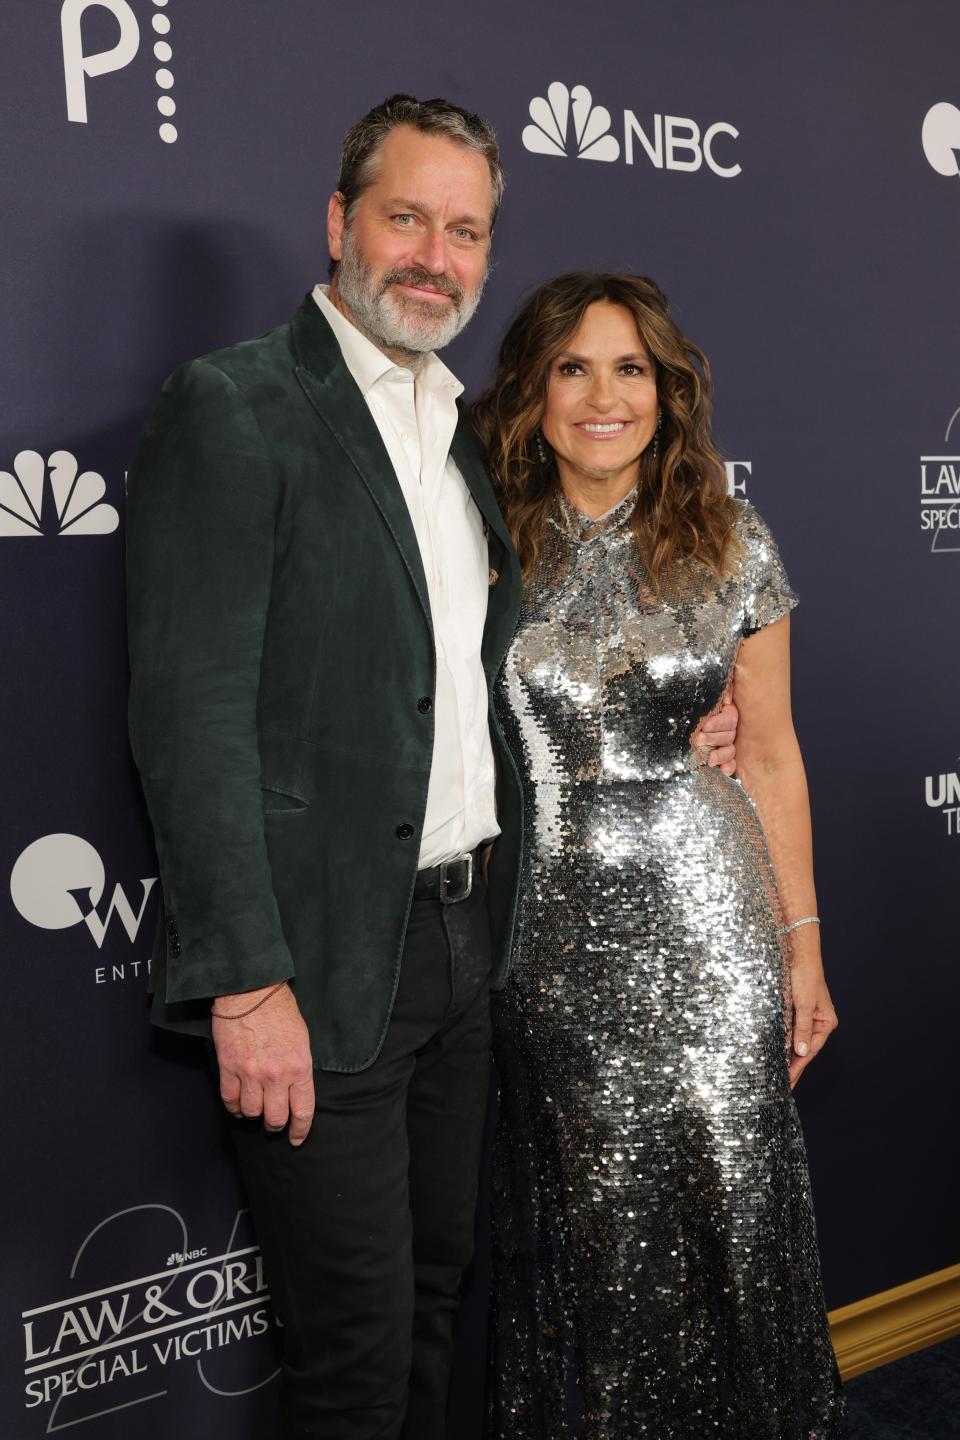 Peter Hermann and Mariska Hargitay attend the "Law & Order: Special Victims Unit" 25th Anniversary Celebration on January 16, 2024 in New York City.